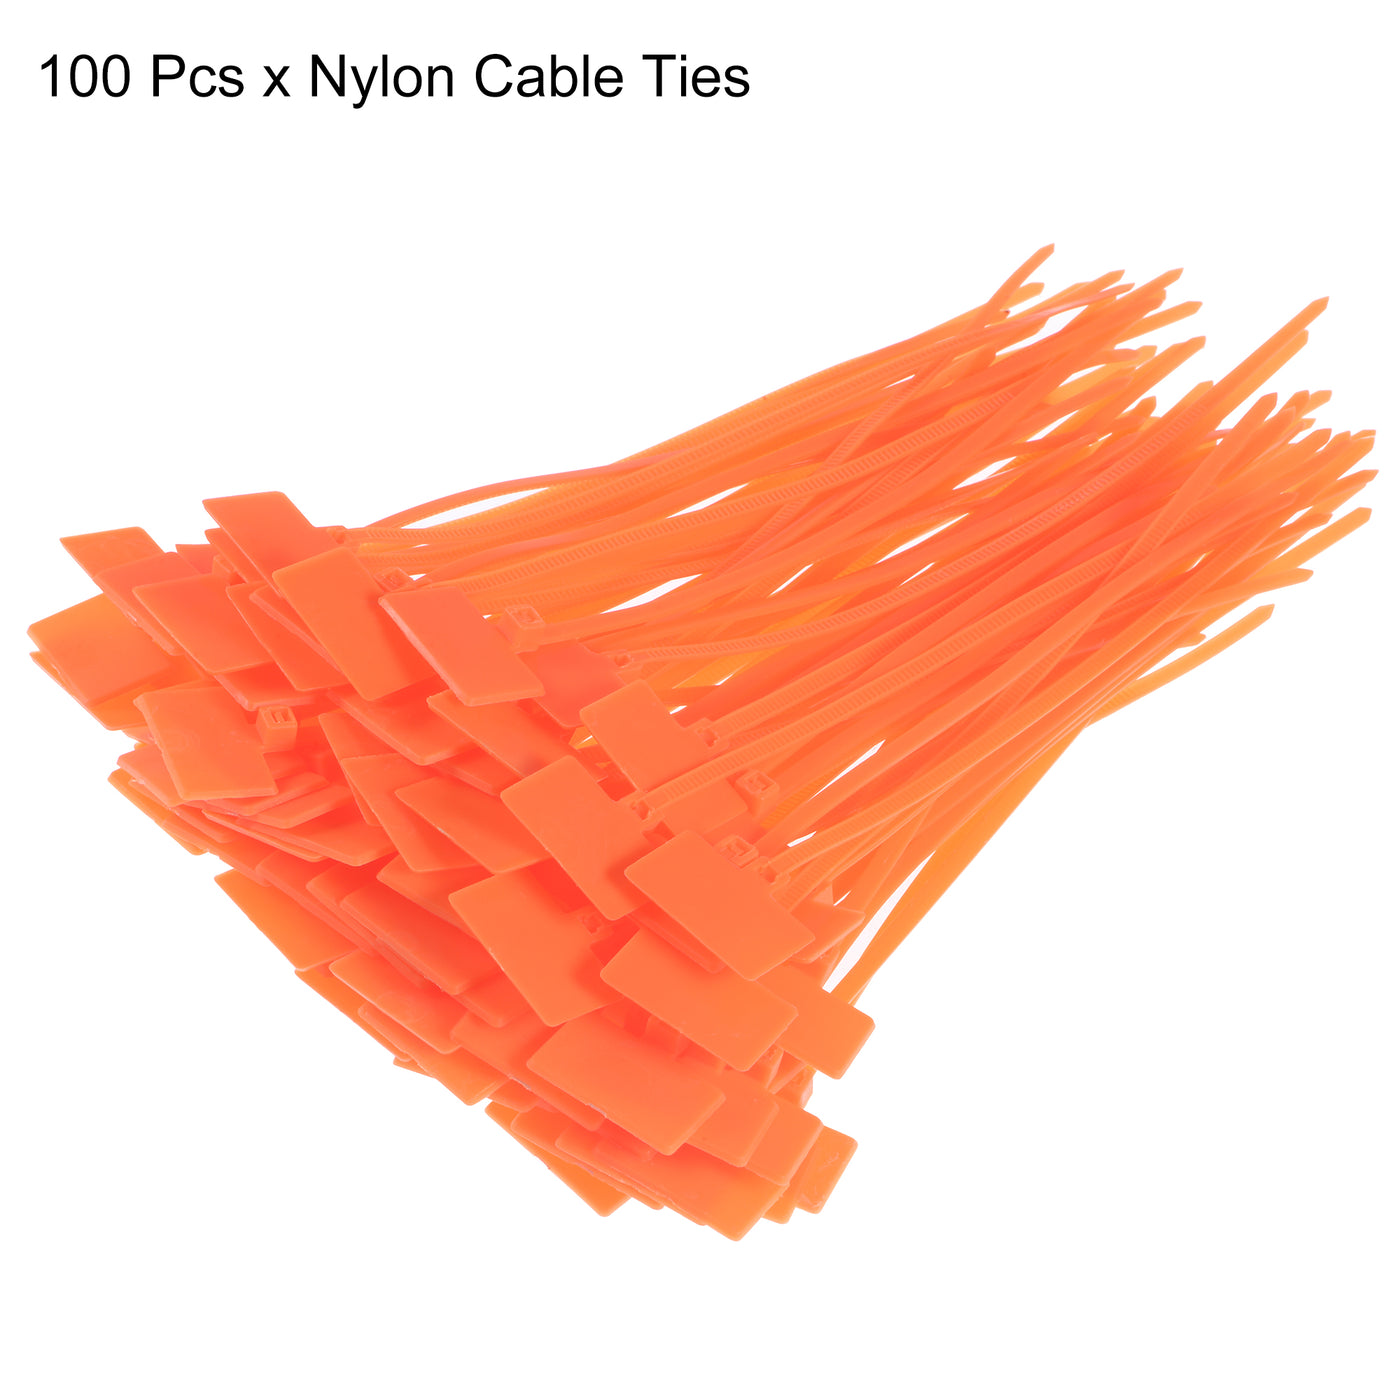 uxcell Uxcell 100pcs Nylon Cable Ties Tags Label Marker Self-Locking for Marking Organizing Orange